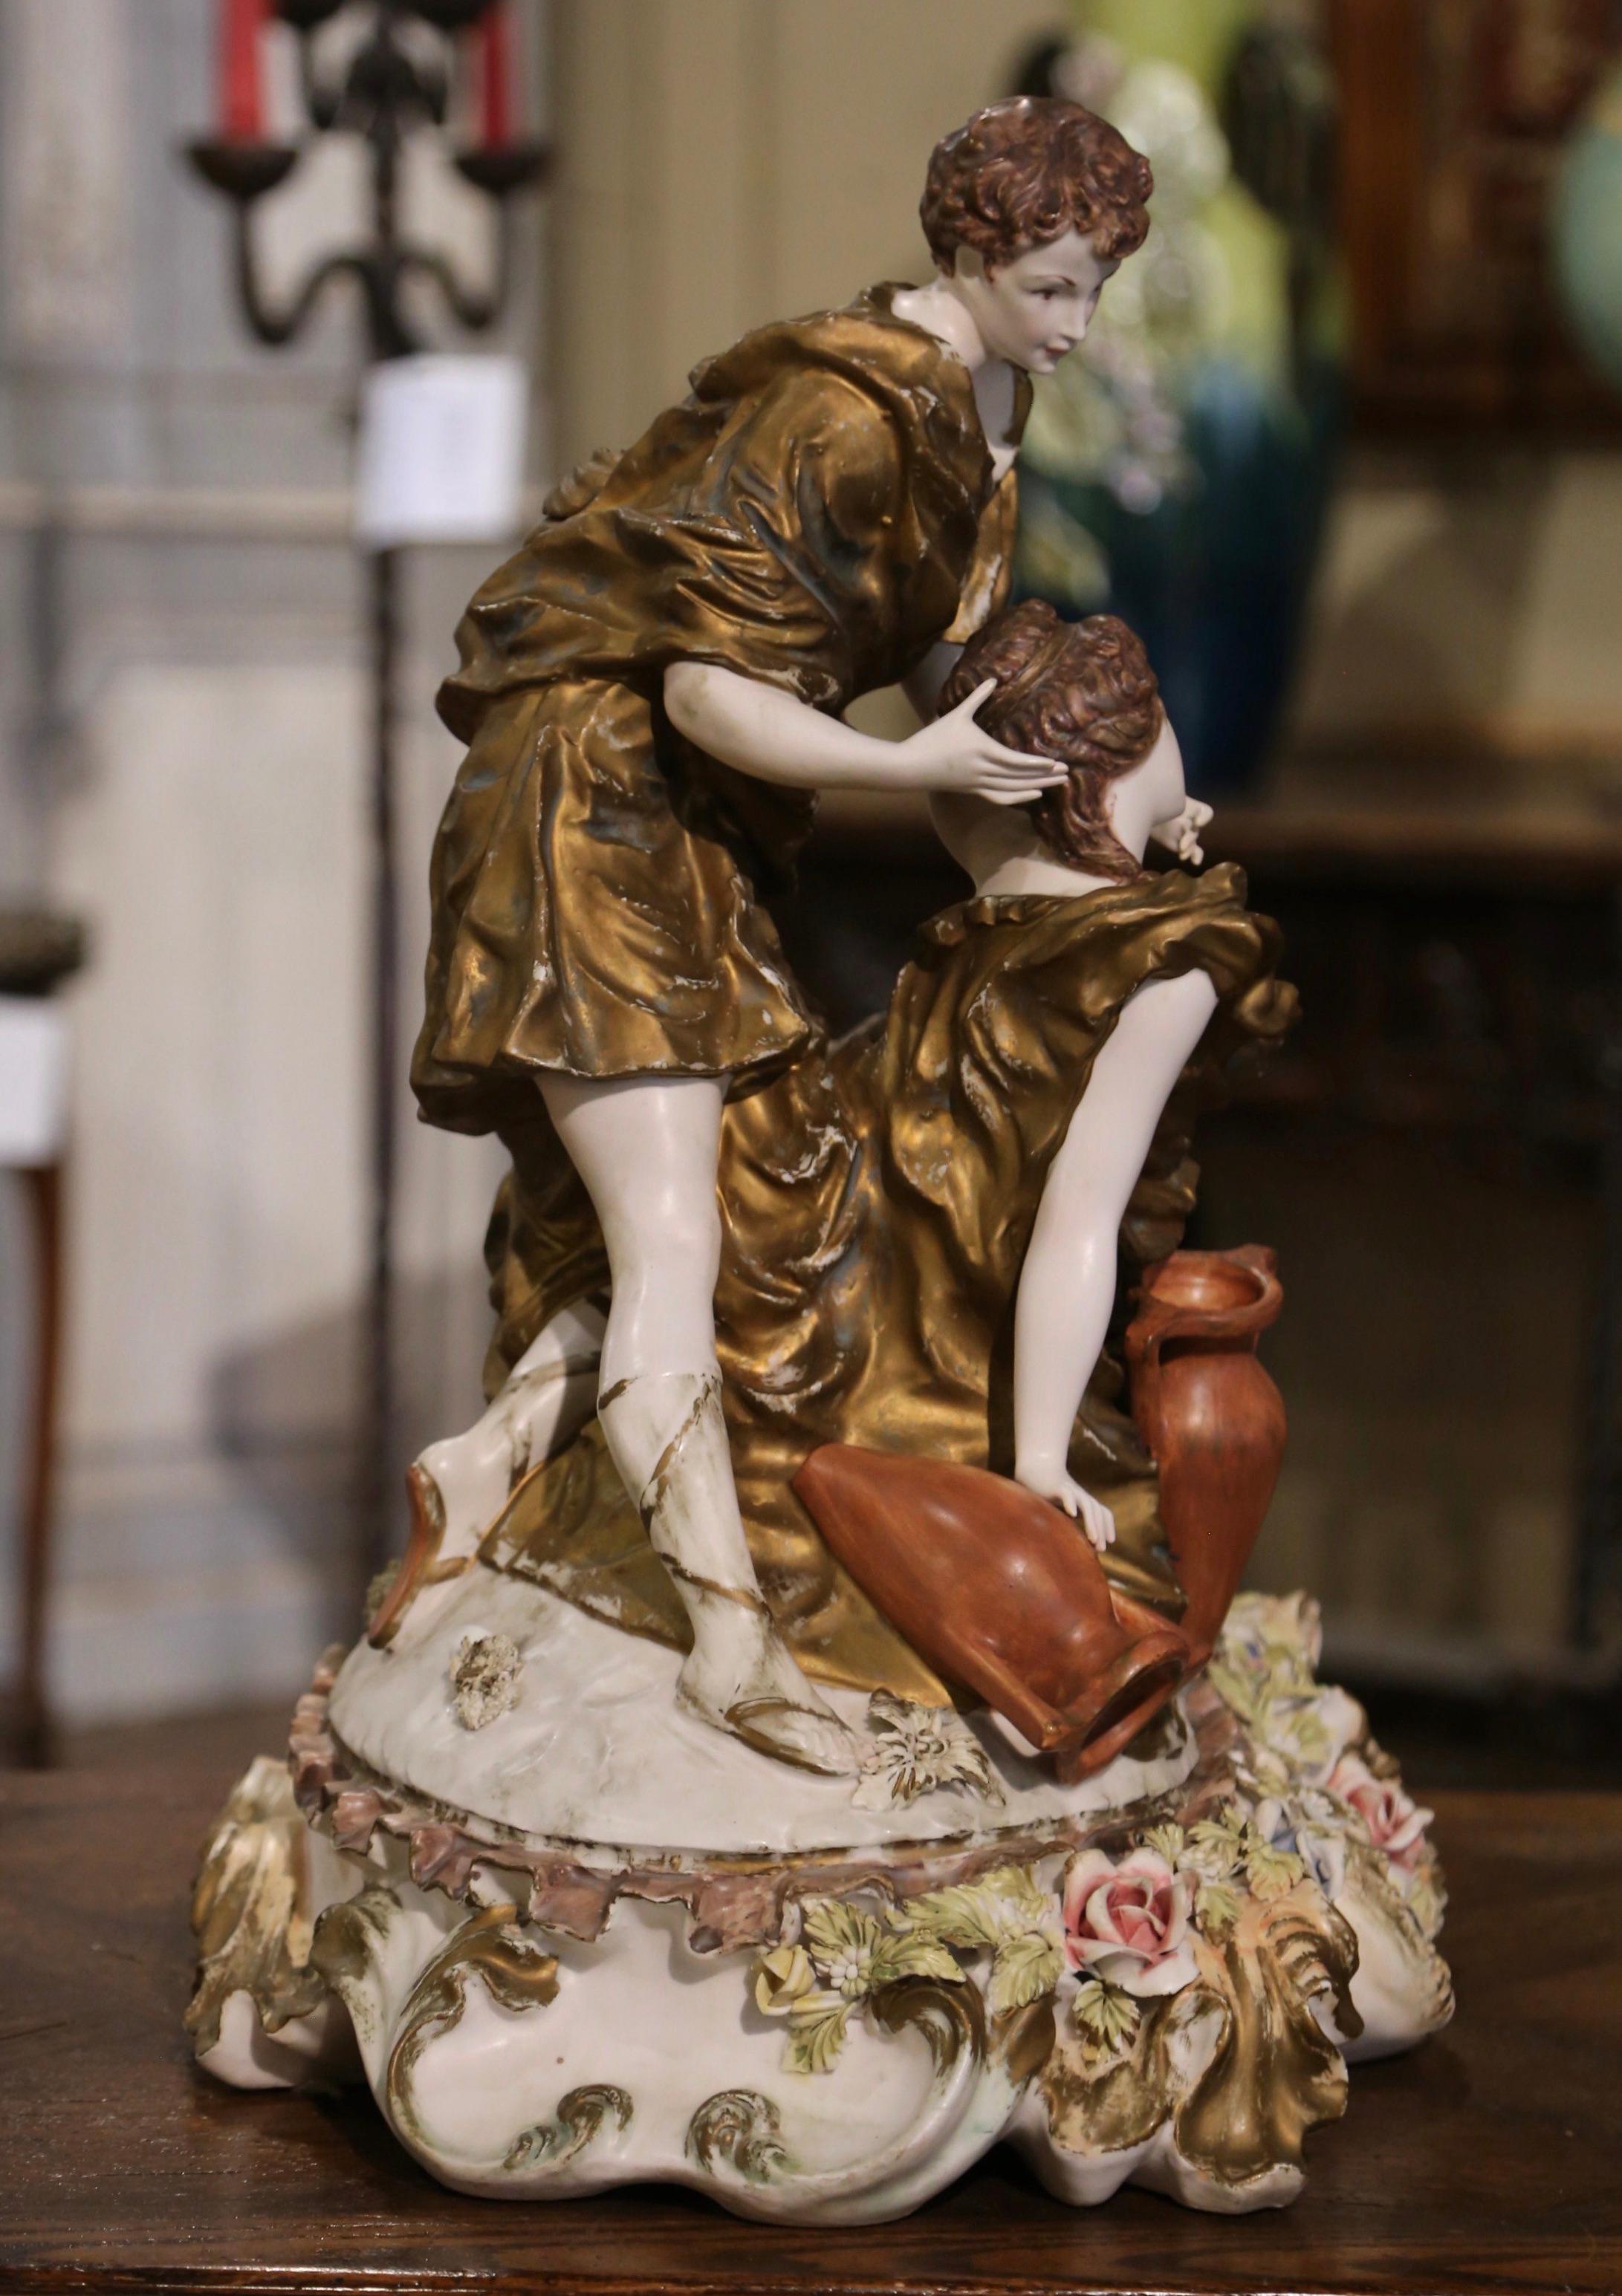 20th Century Italian Hand-Painted and Gilt Porcelain Capodimonte Figurine Statue For Sale 2